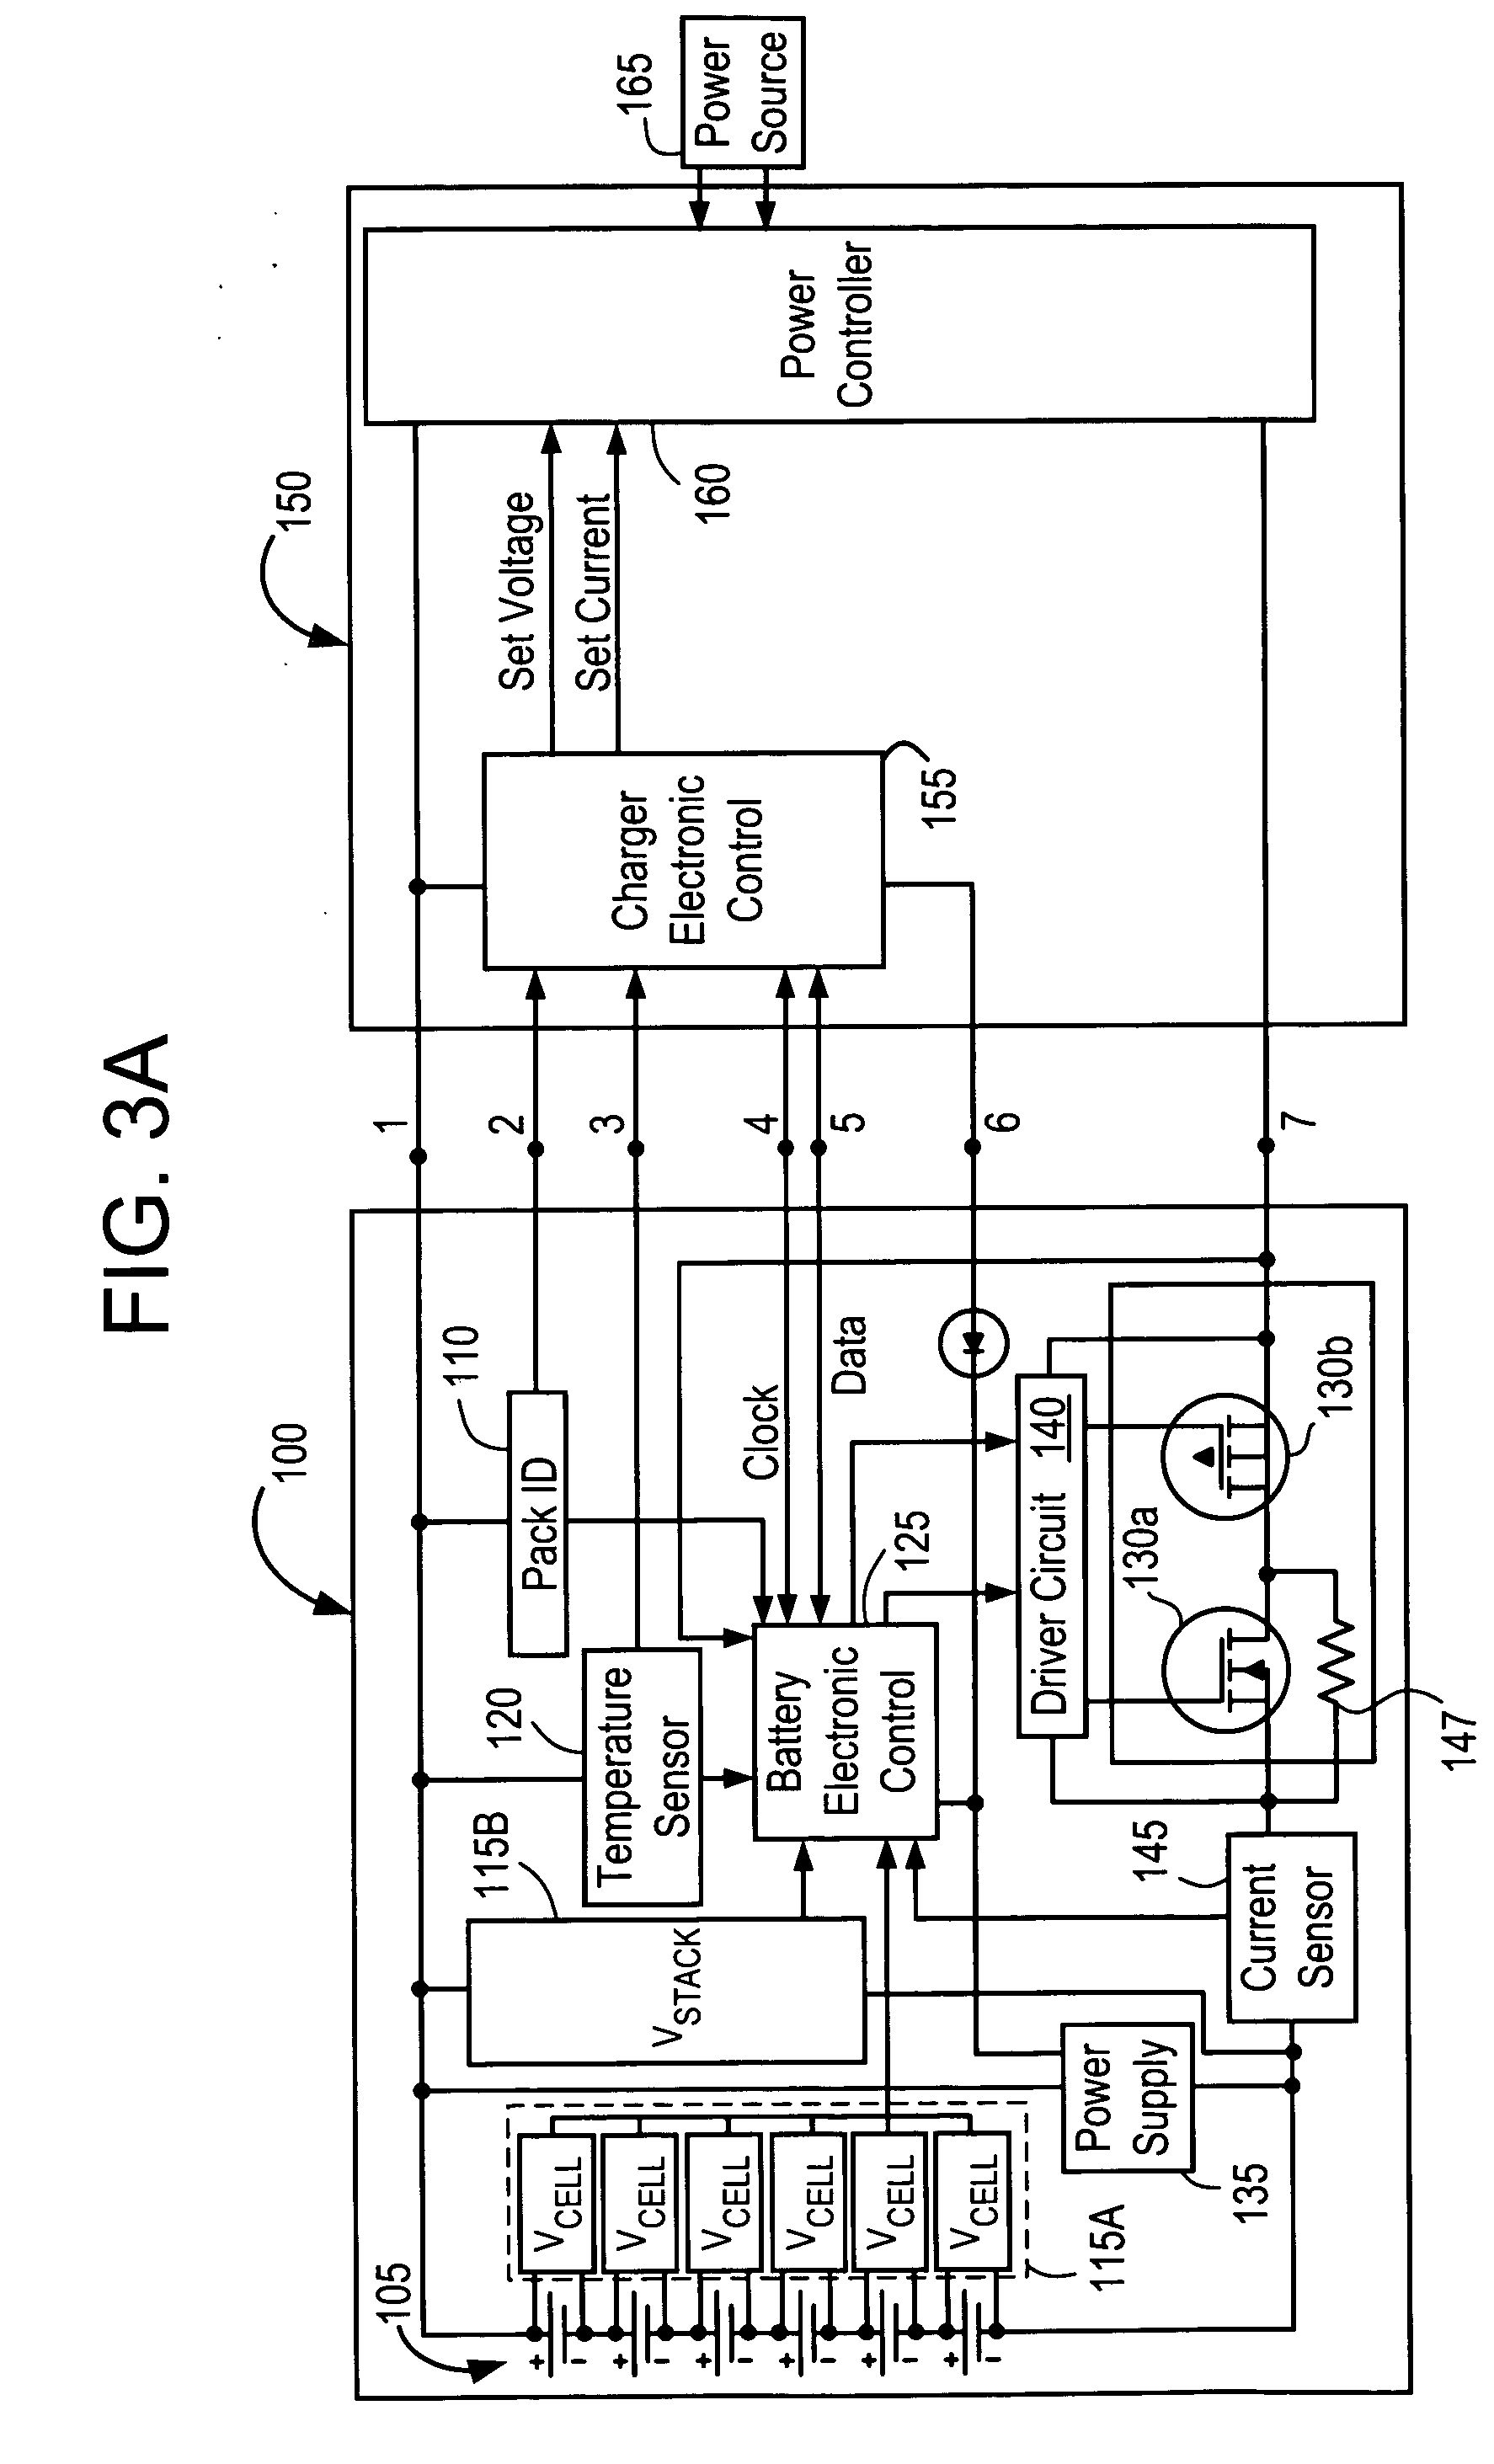 Protection methods, protection circuits and protective devices for secondary batteries, a power tool, charger and battery pack adapted to provide protection against fault conditions in the battery pack